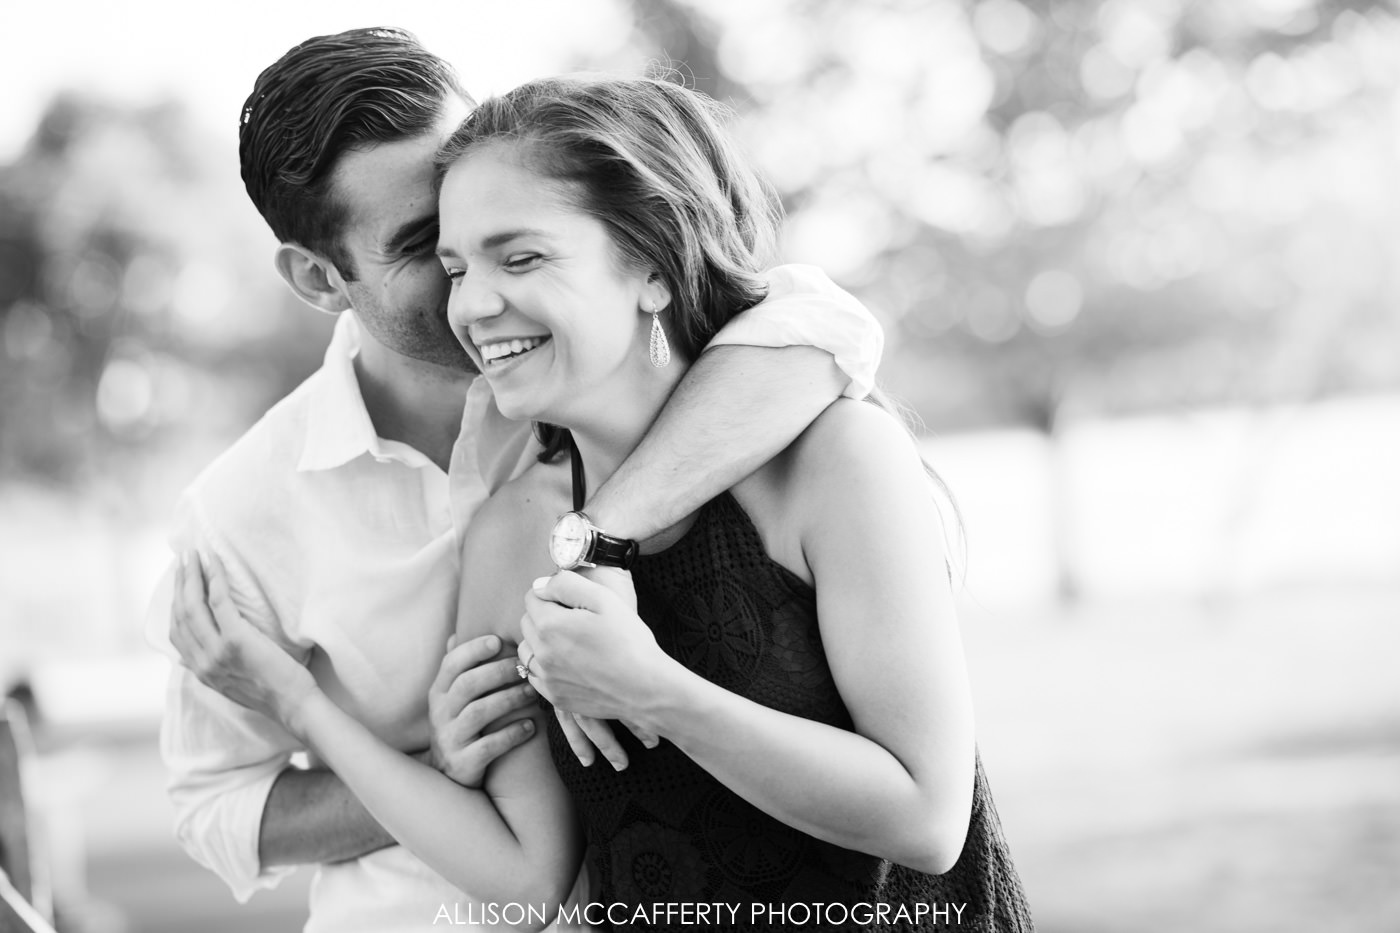 South Jersey Engagement Session Locations